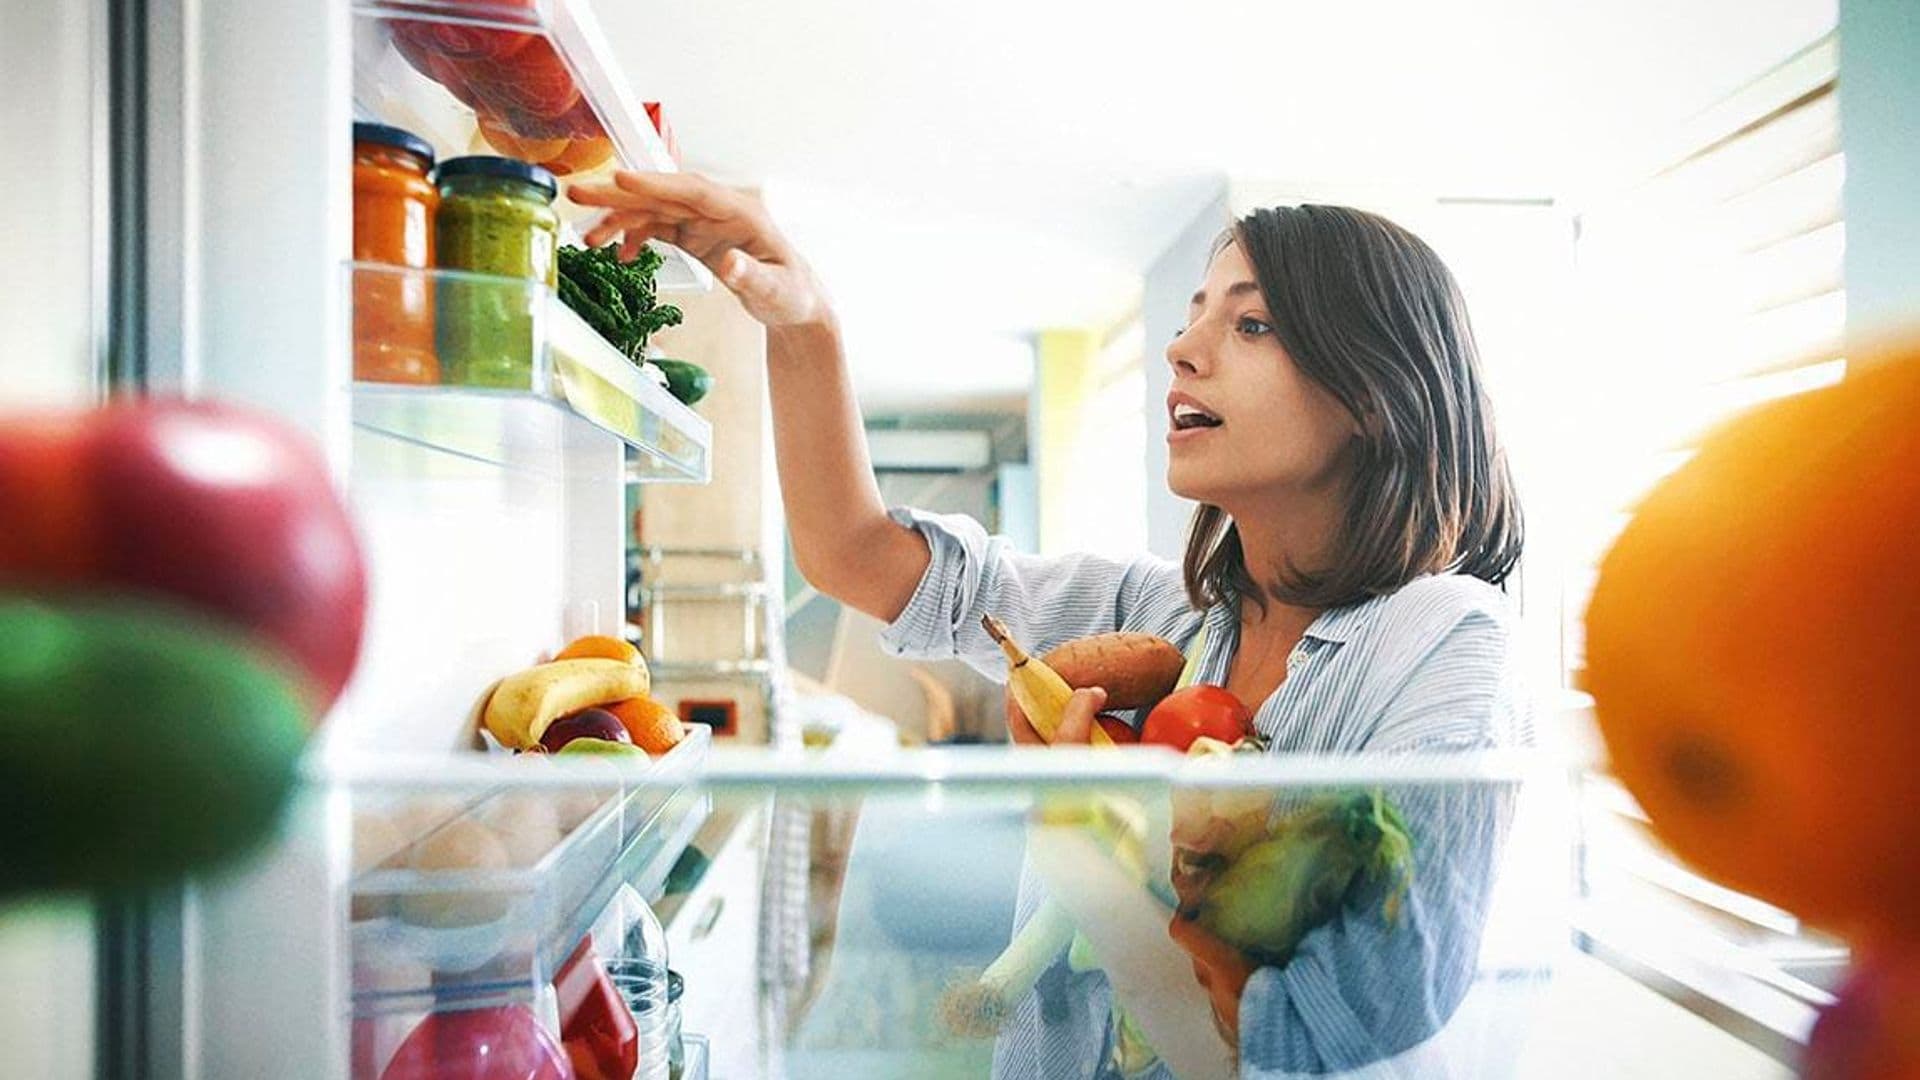 Young lady taking fruits and vegetables out of the fridge